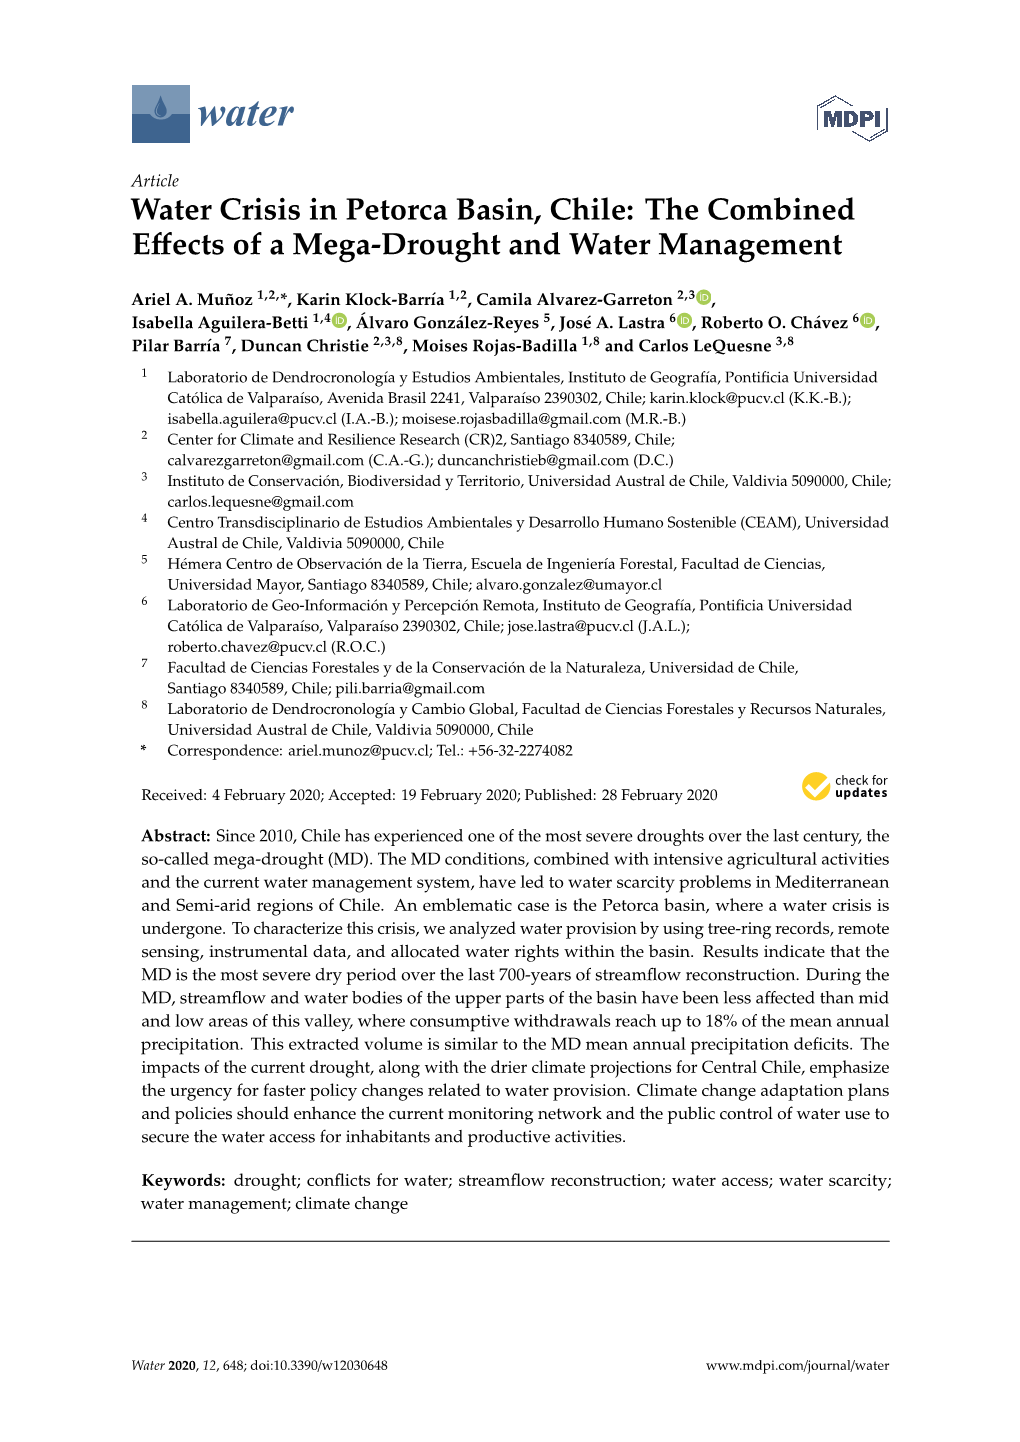 Water Crisis in Petorca Basin, Chile: the Combined Eﬀects of a Mega-Drought and Water Management